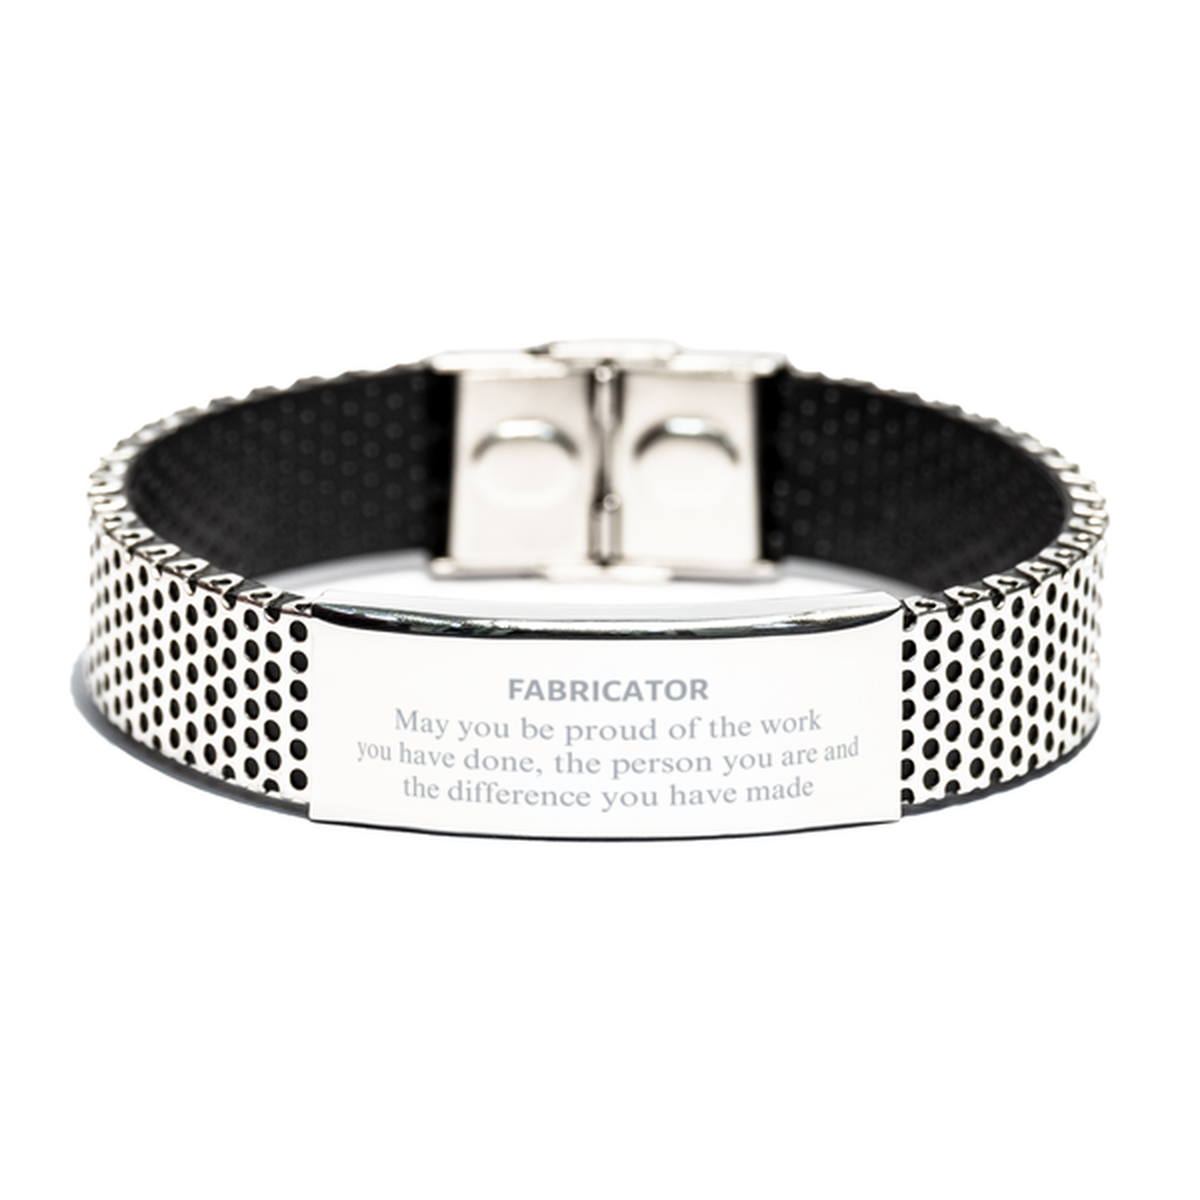 Fabricator May you be proud of the work you have done, Retirement Fabricator Stainless Steel Bracelet for Colleague Appreciation Gifts Amazing for Fabricator